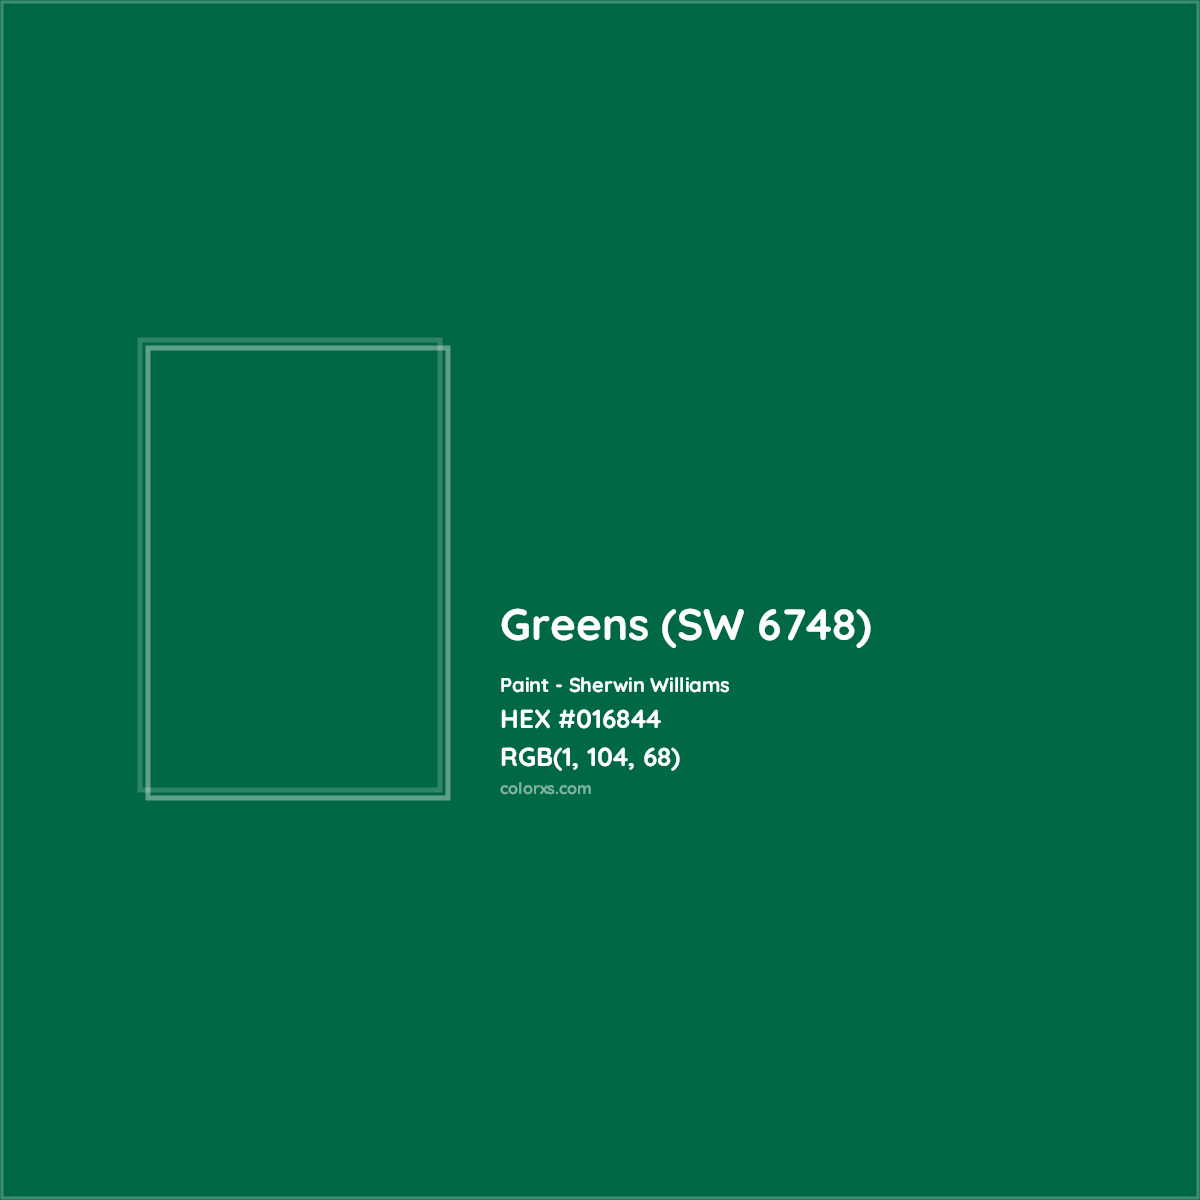 HEX #016844 Greens (SW 6748) Paint Sherwin Williams - Color Code